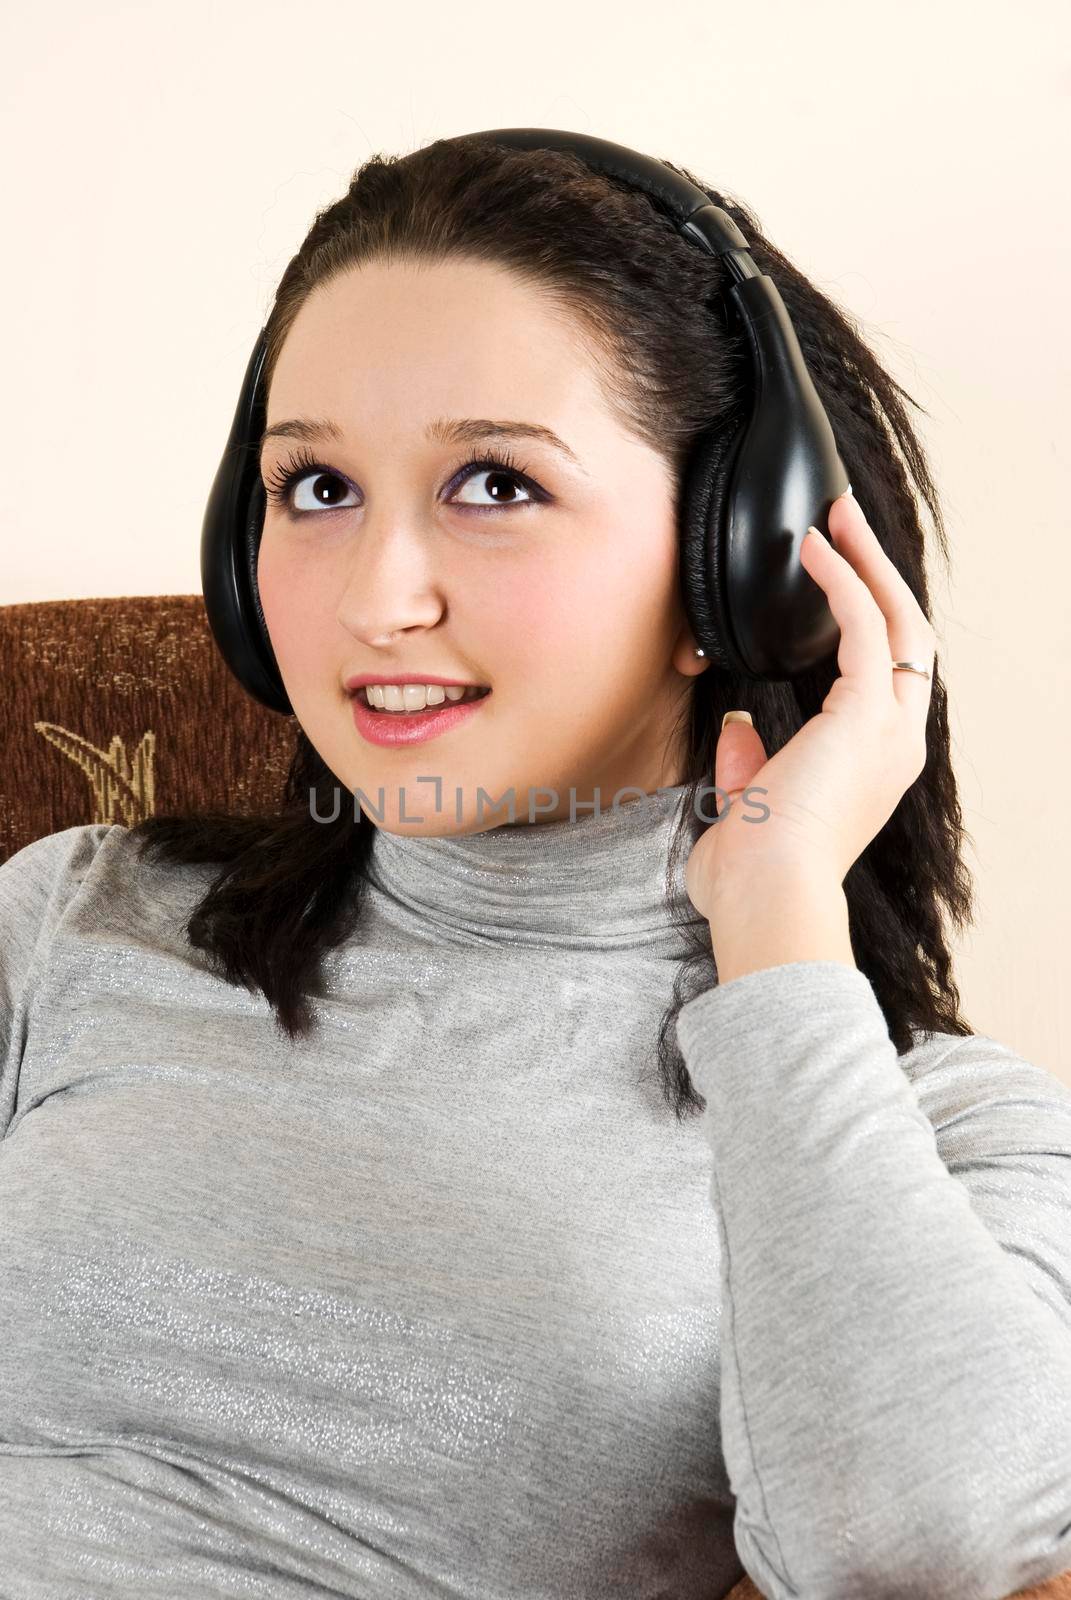 Beauty girl listening music by justmeyo